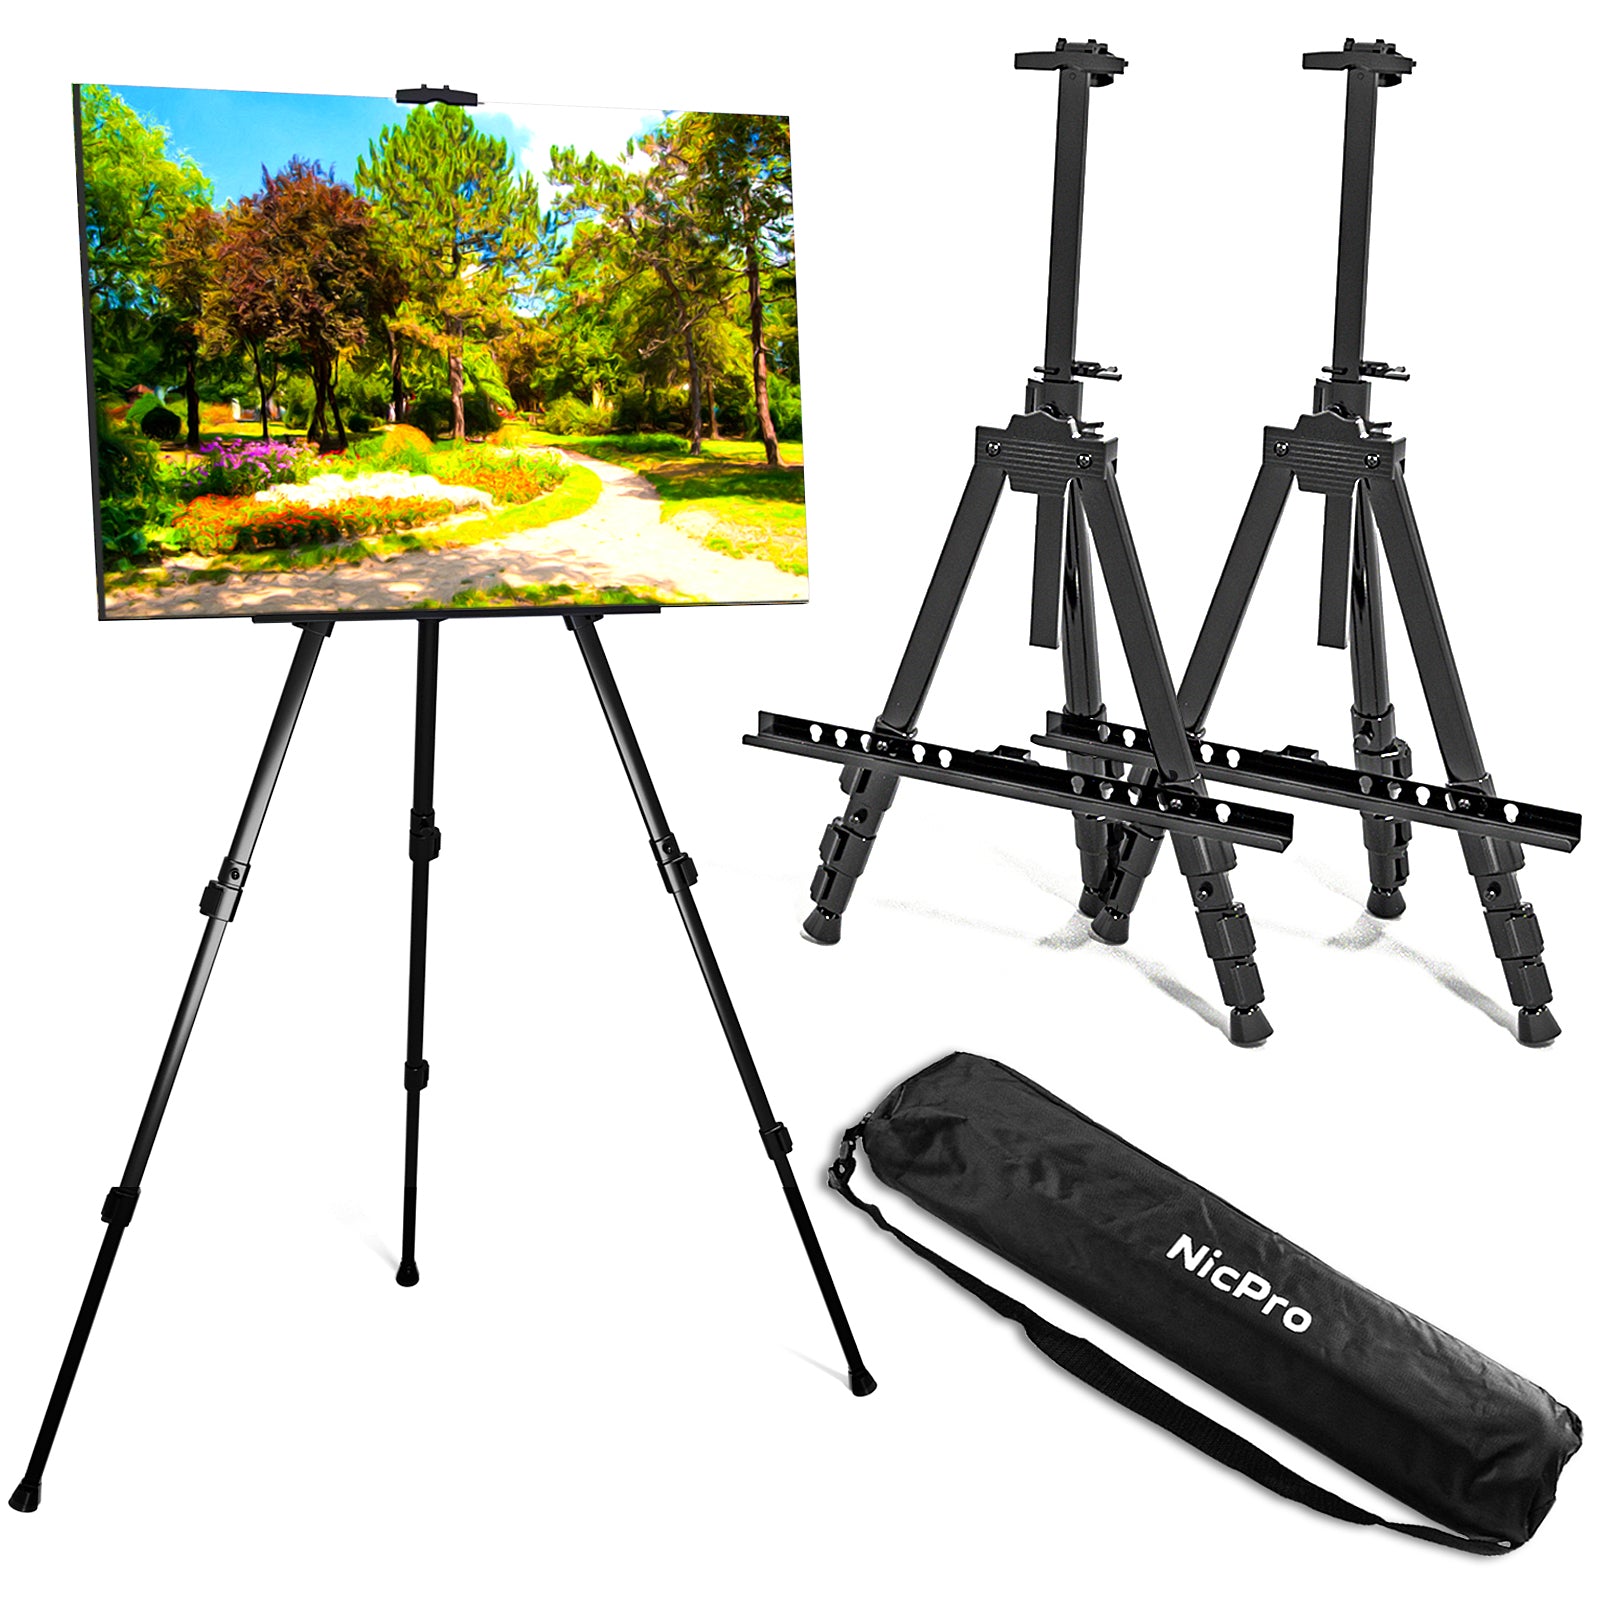 loeqian 2 Pack Painting Easel Stand 63 Foldable Easel Portable Artist Floor Easel, Metal Easel Stand for Display Wedding Sign, Art P